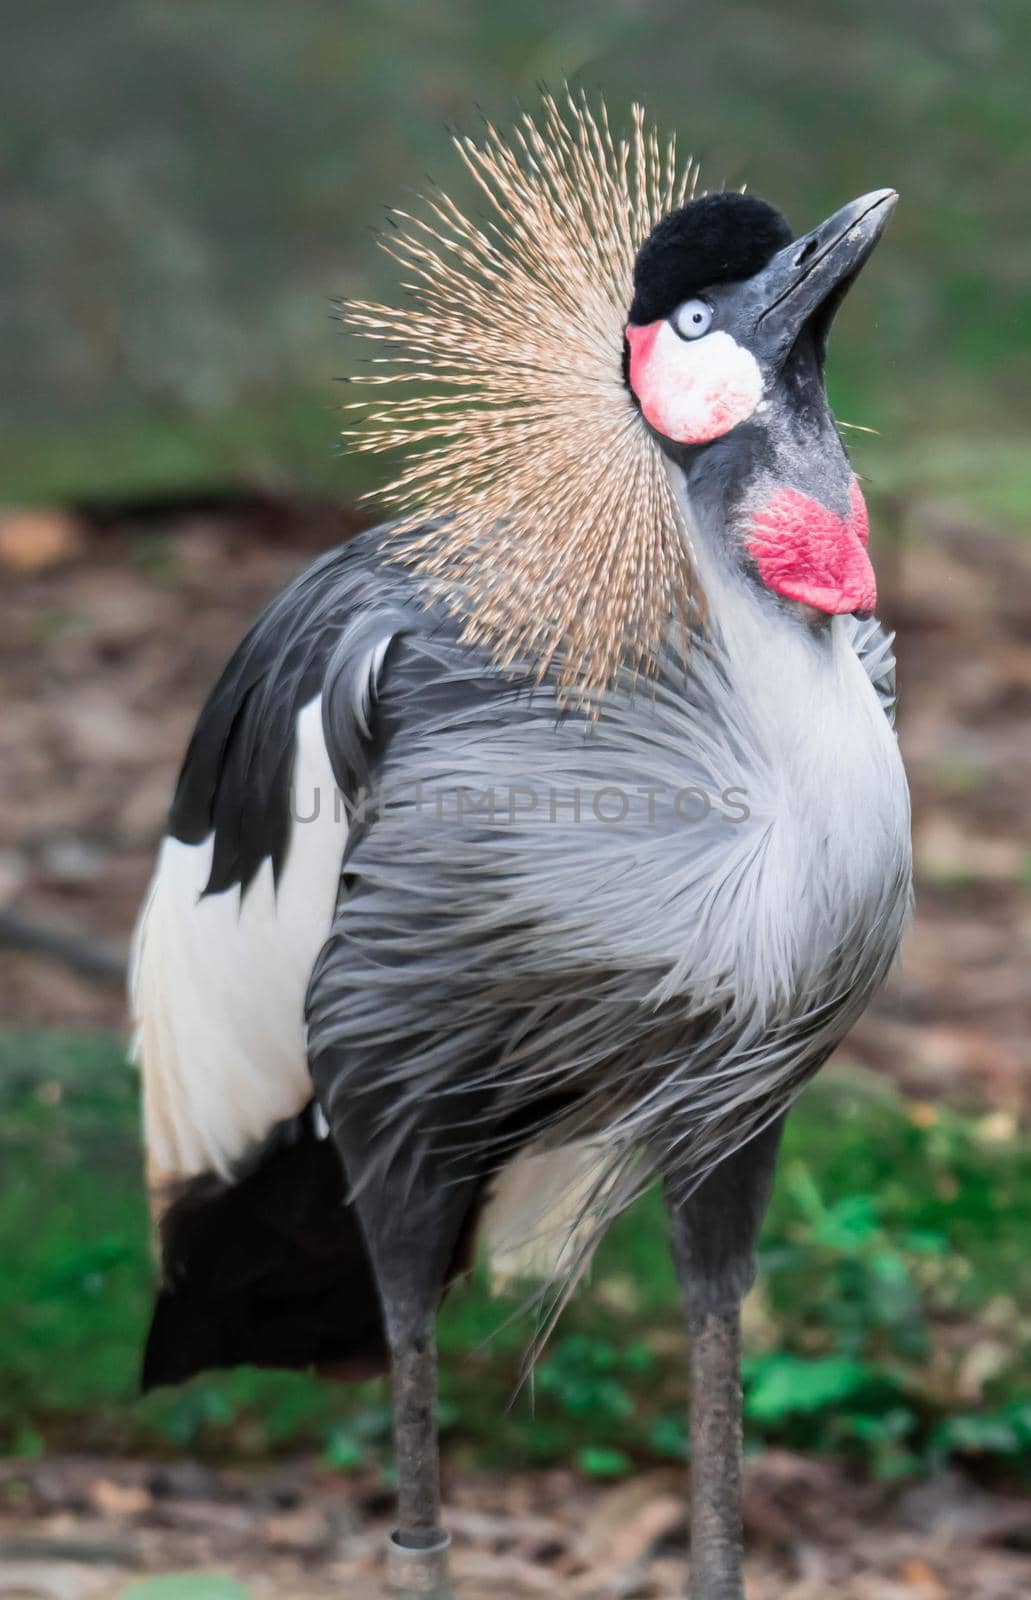 Grey crowned crane, also known as the African crowned crane, golden crested crane, golden crowned crane, East African crane, East African crowned crane, Eastern crowned crane, South African crane by billroque